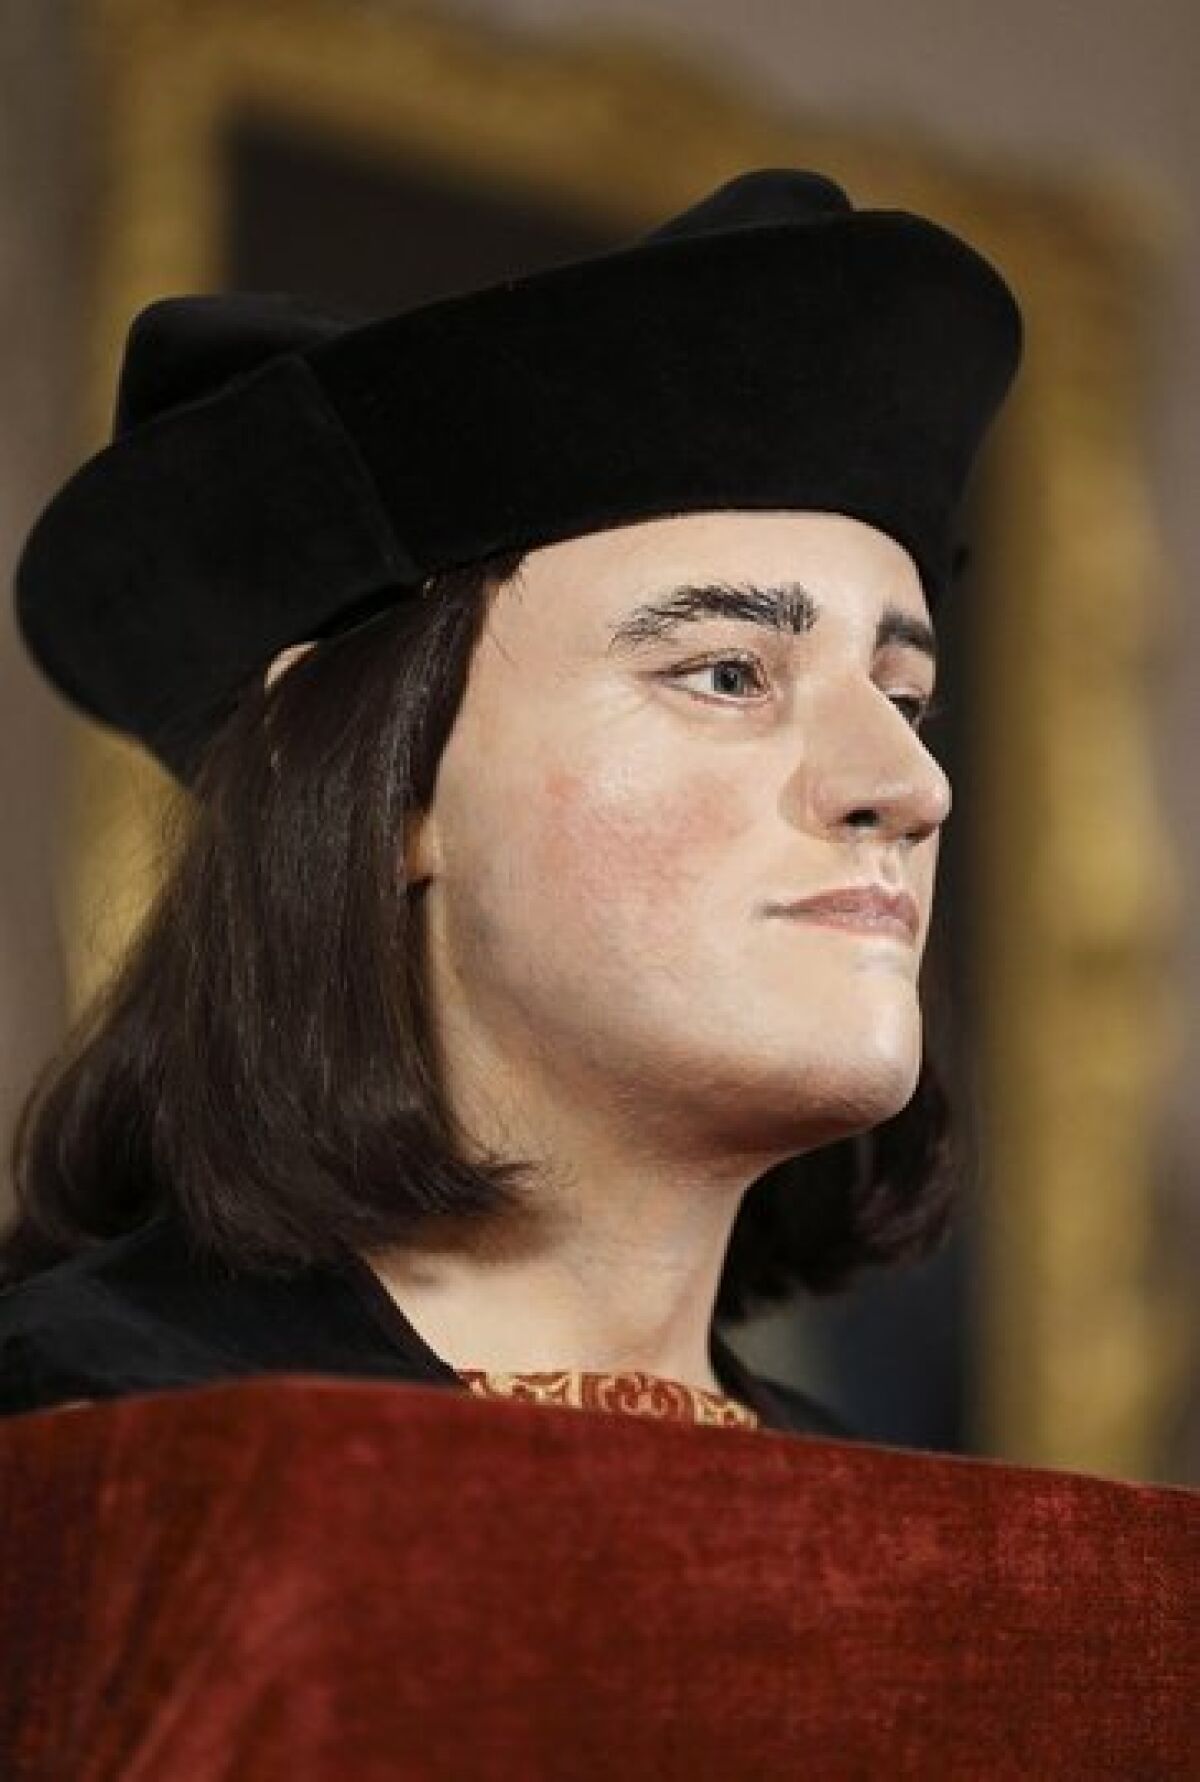 A plastic model of King Richard III was displayed recently after scientists identified his remains. Now two researchers have taken a shot at psychoanalyzing him, though they acknowledge the historical record is limited.